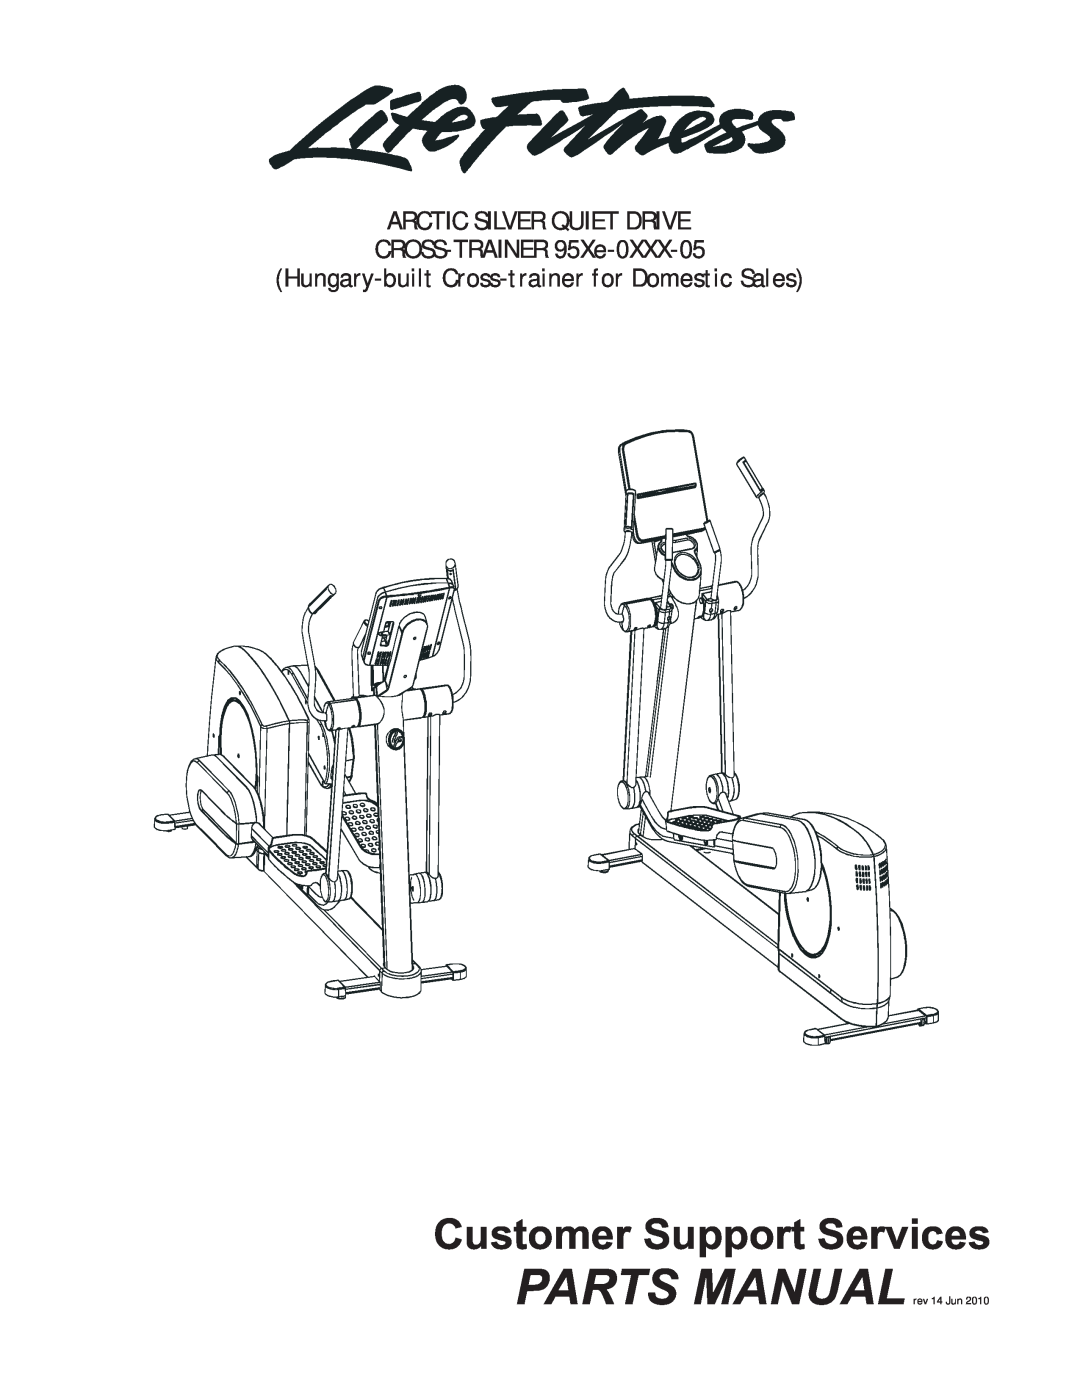 Life Fitness manual Customer Support Services, ARCTIC SILVER QUIET DRIVE CROSS-TRAINER 95Xe-0XXX-05 